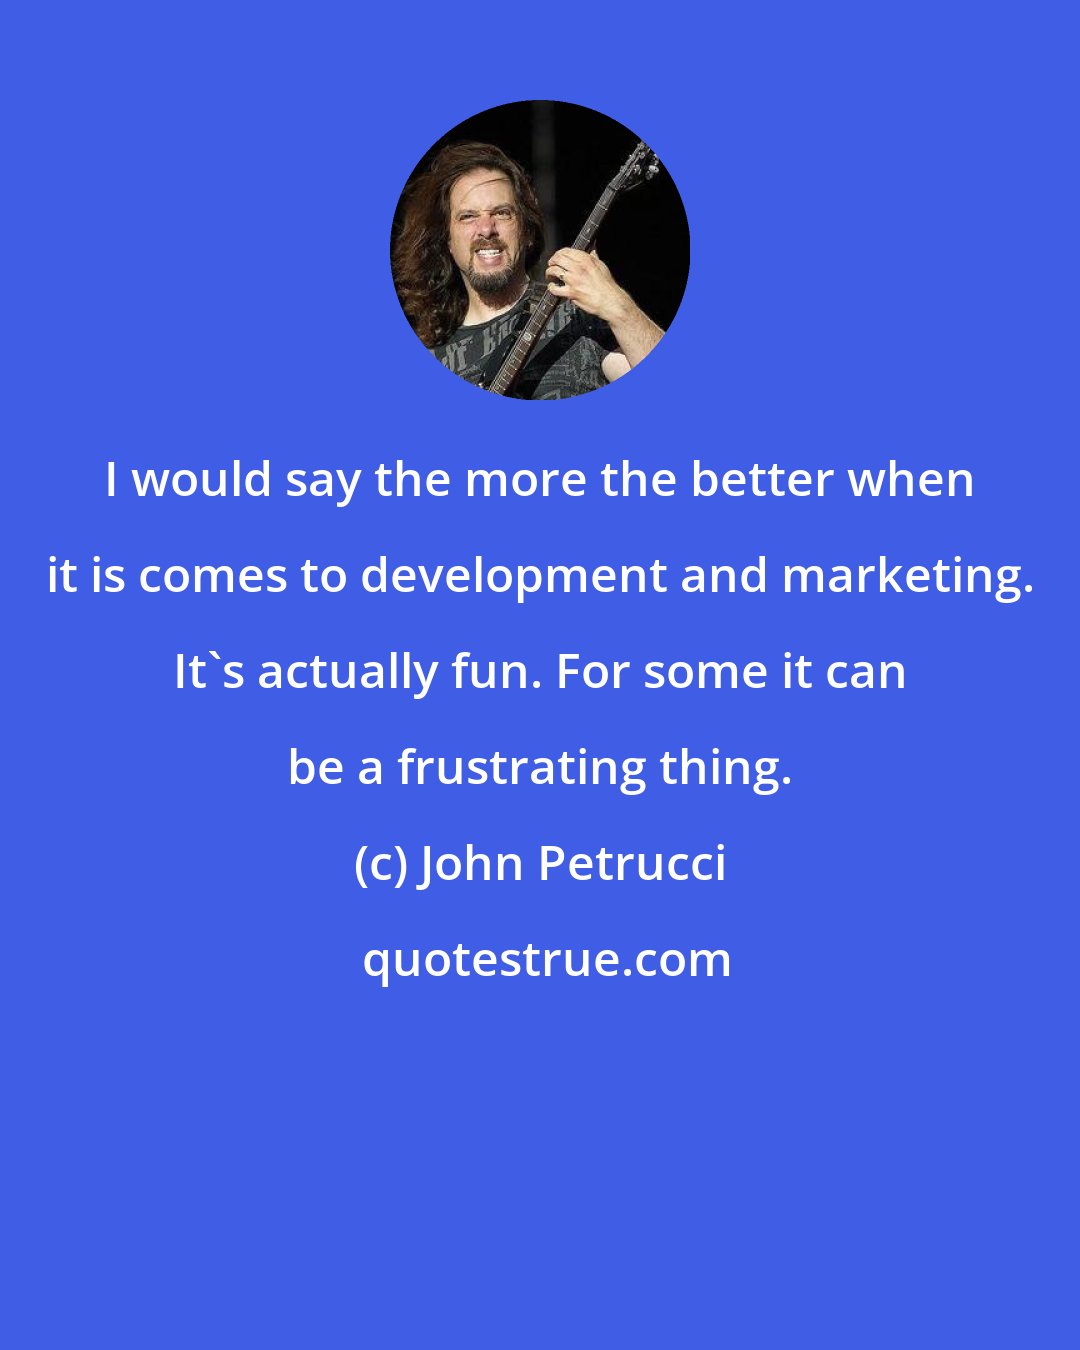 John Petrucci: I would say the more the better when it is comes to development and marketing. It's actually fun. For some it can be a frustrating thing.